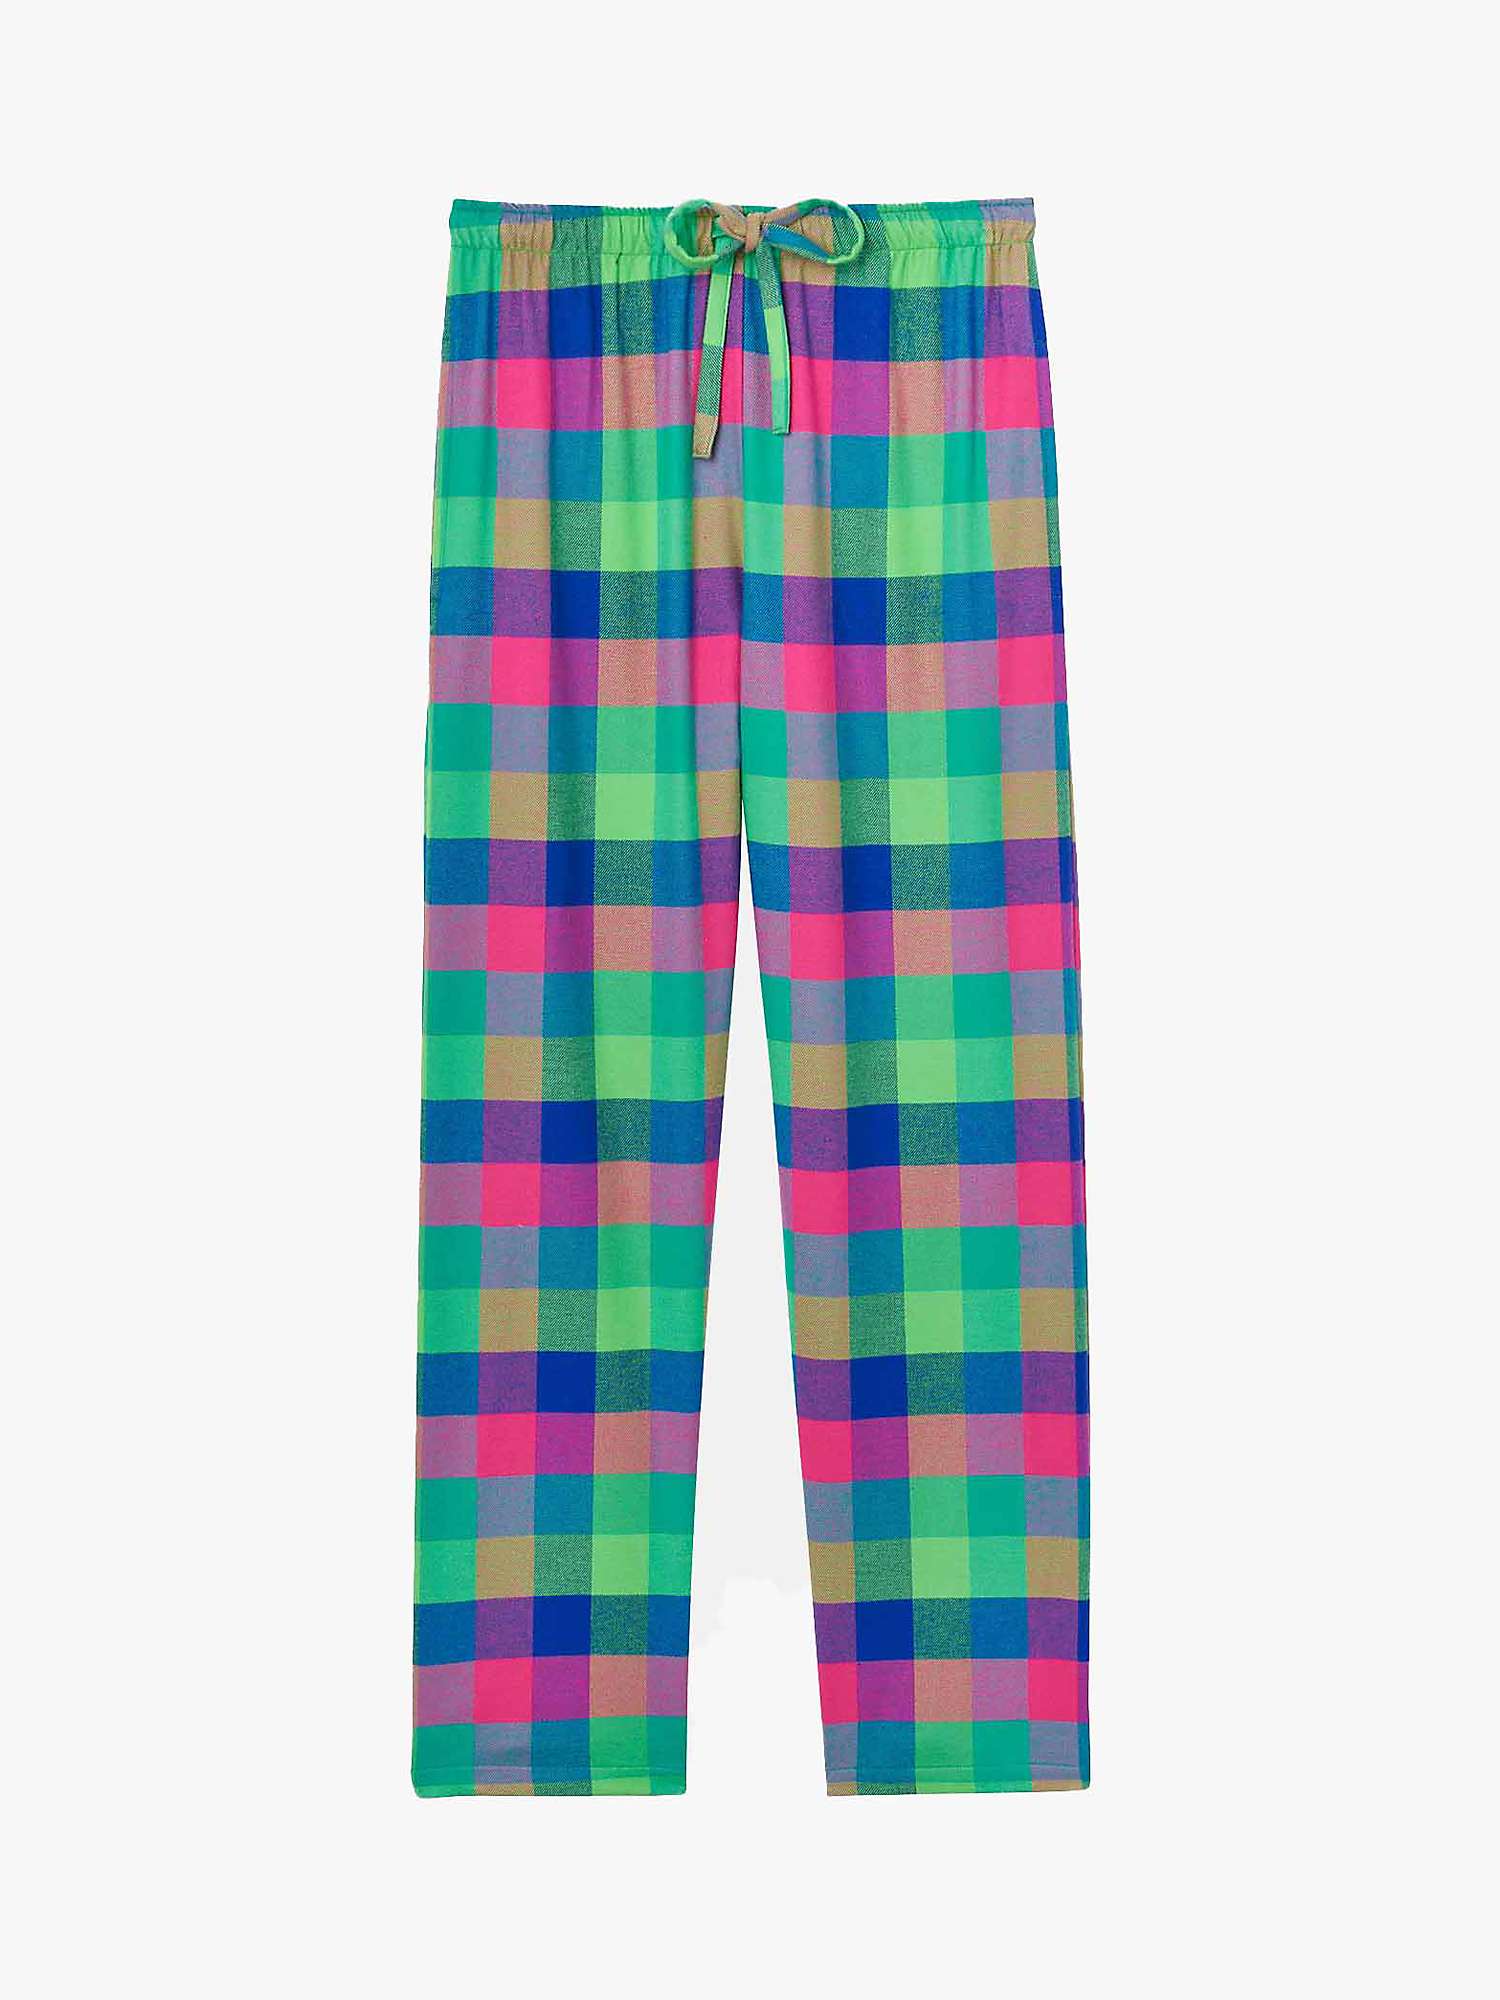 Buy British Boxers Shire Square Brushed Cotton Pyjama Trousers Online at johnlewis.com